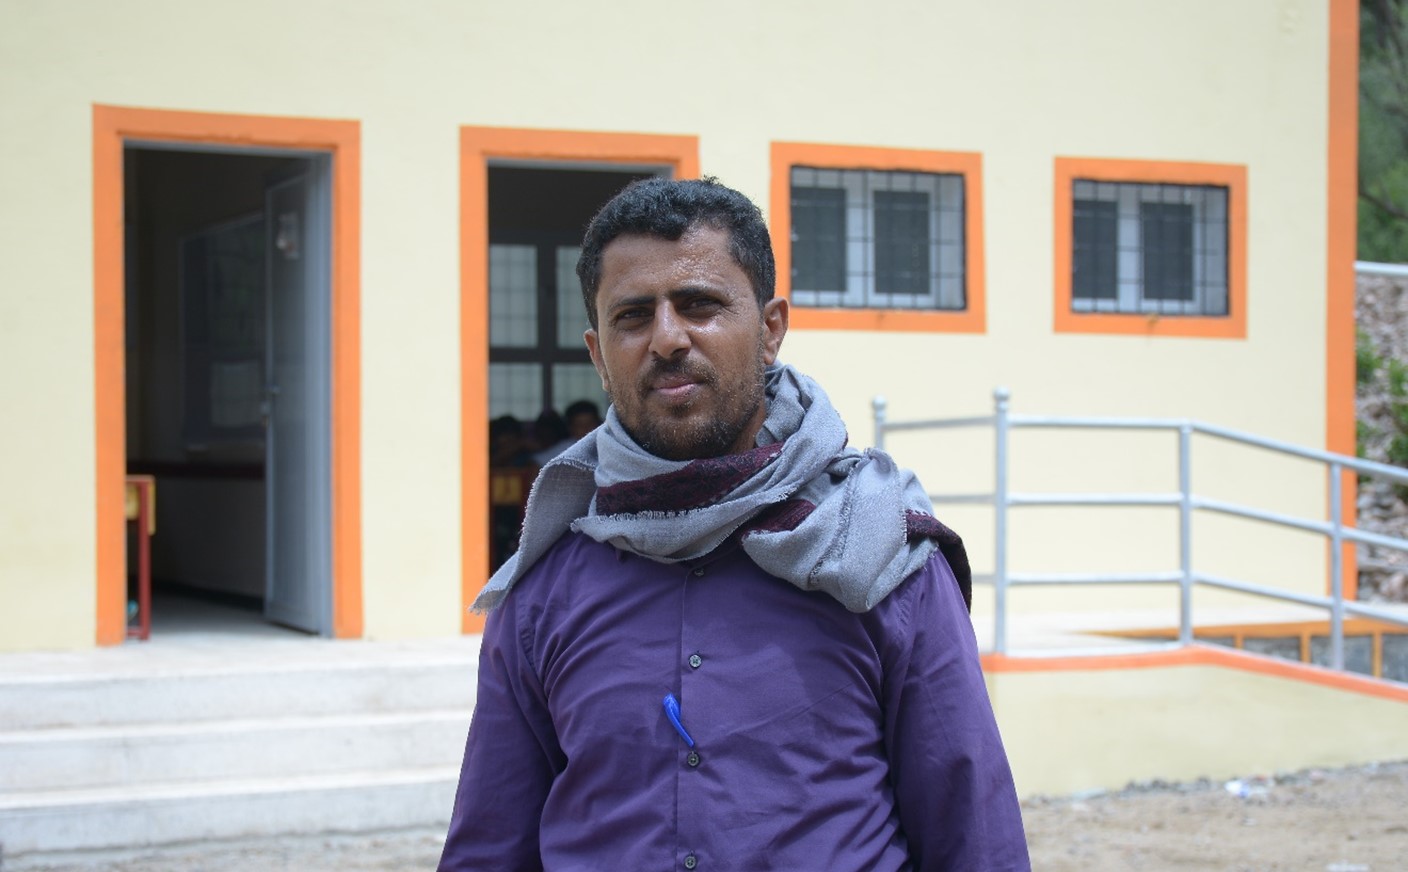 A man in purple shirt and grey scarf standing outside of a building